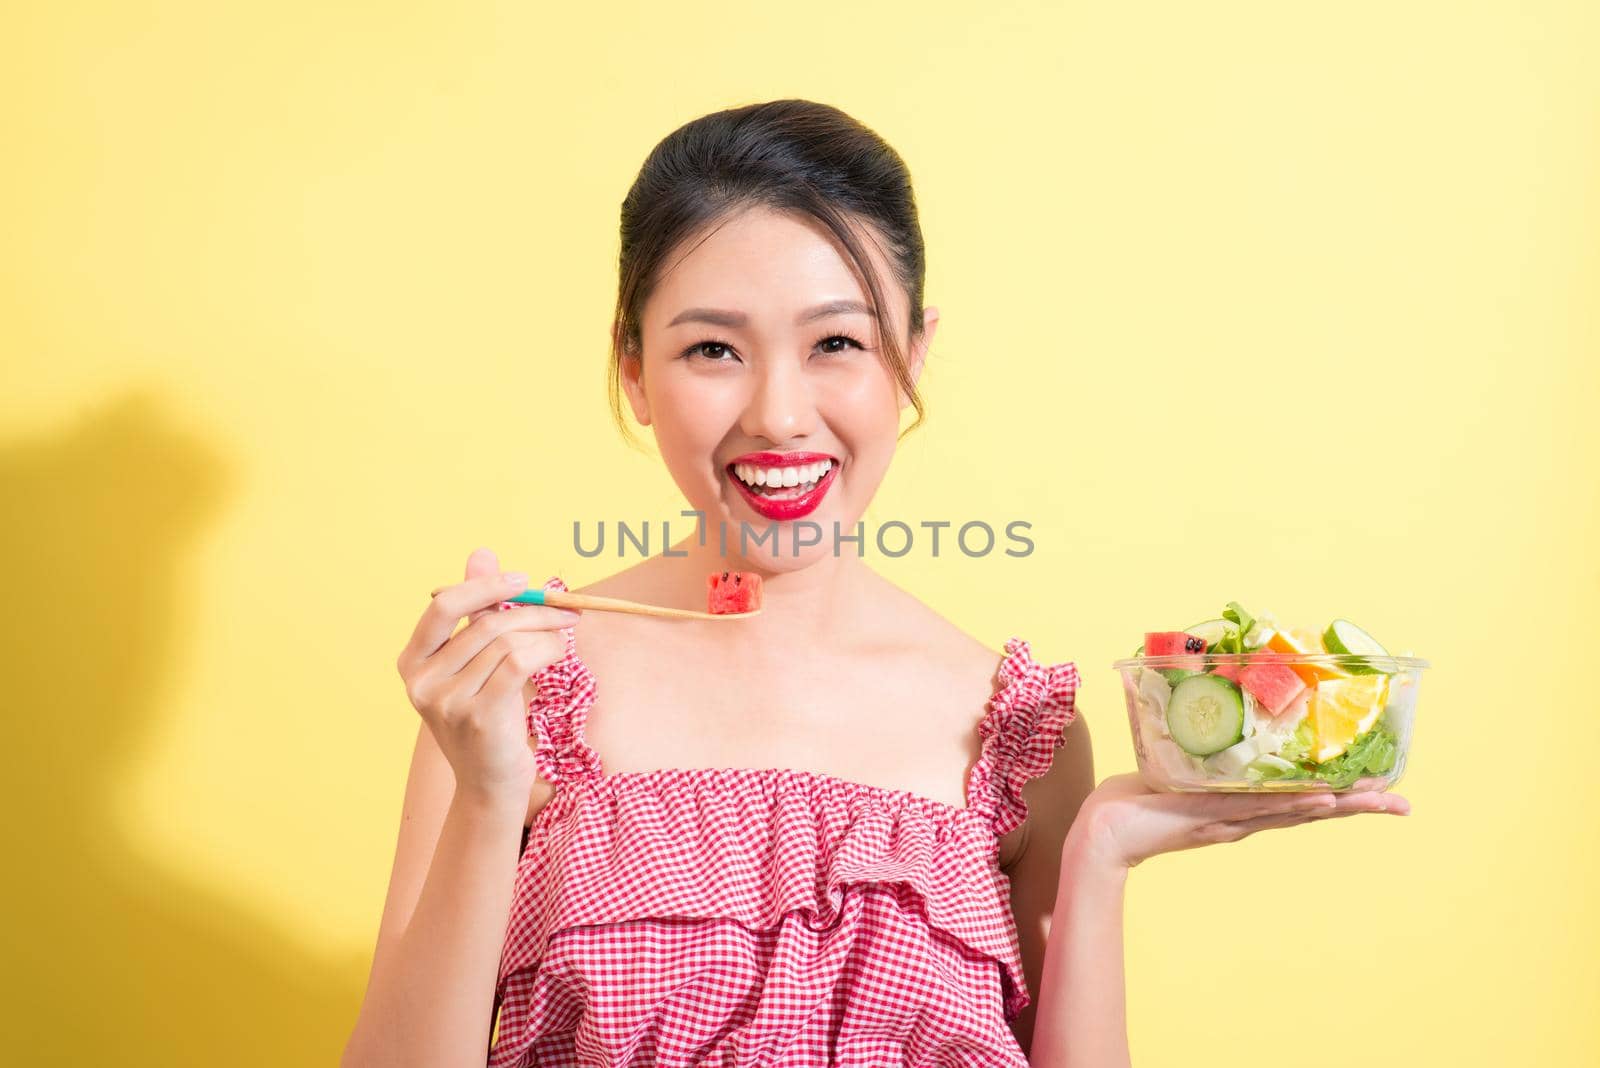 Fashion portrait of young fashionable woman in summer outfit posing with bowl of salad by makidotvn